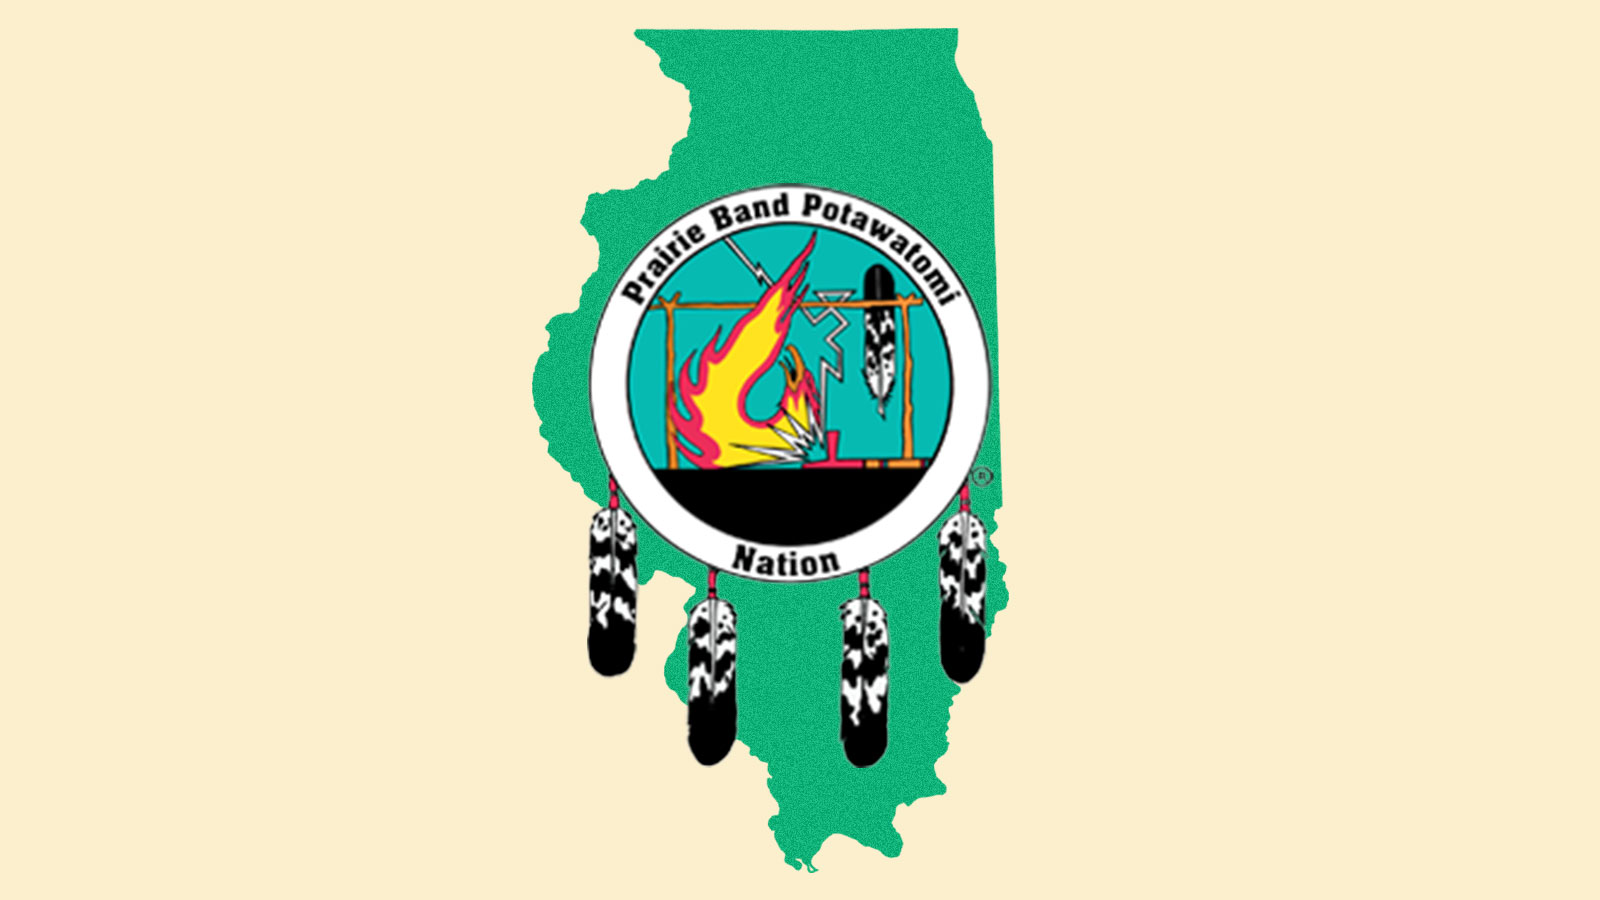 Digital collage of green silhouette of state of Illinois with the seal of the Prairie Band Potawatomi Nation on top